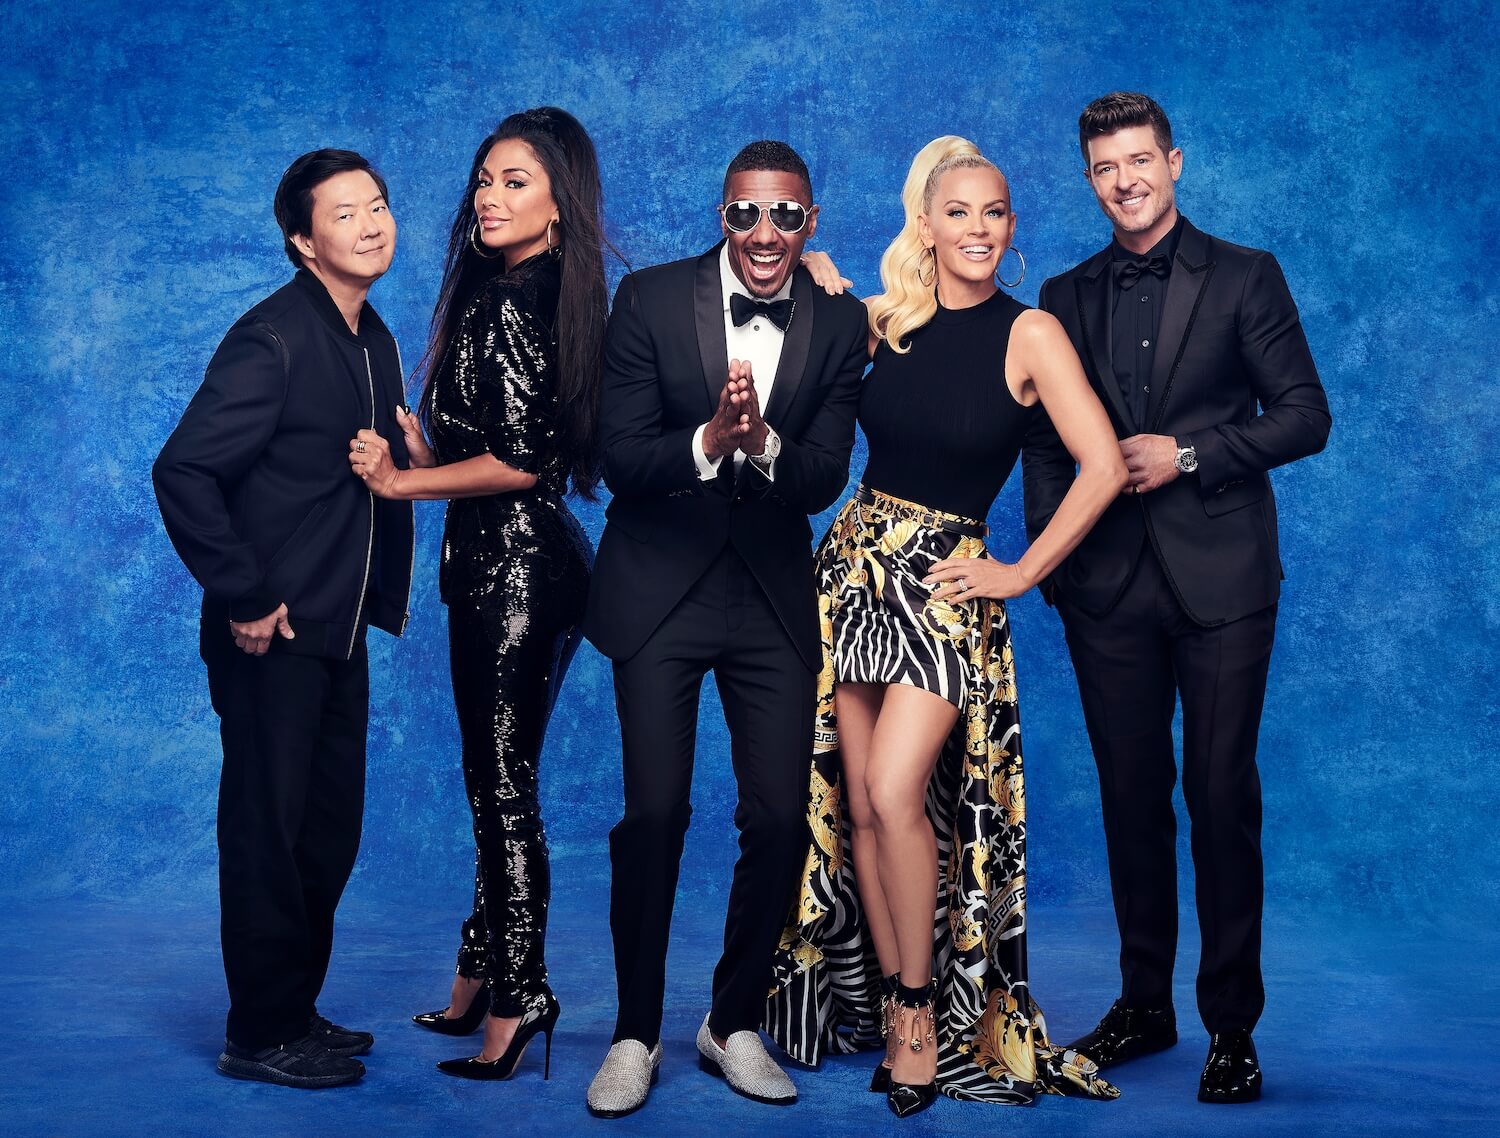 'The Masked Singer' host Nick Cannon with the judges, including Nicole Scherzinger